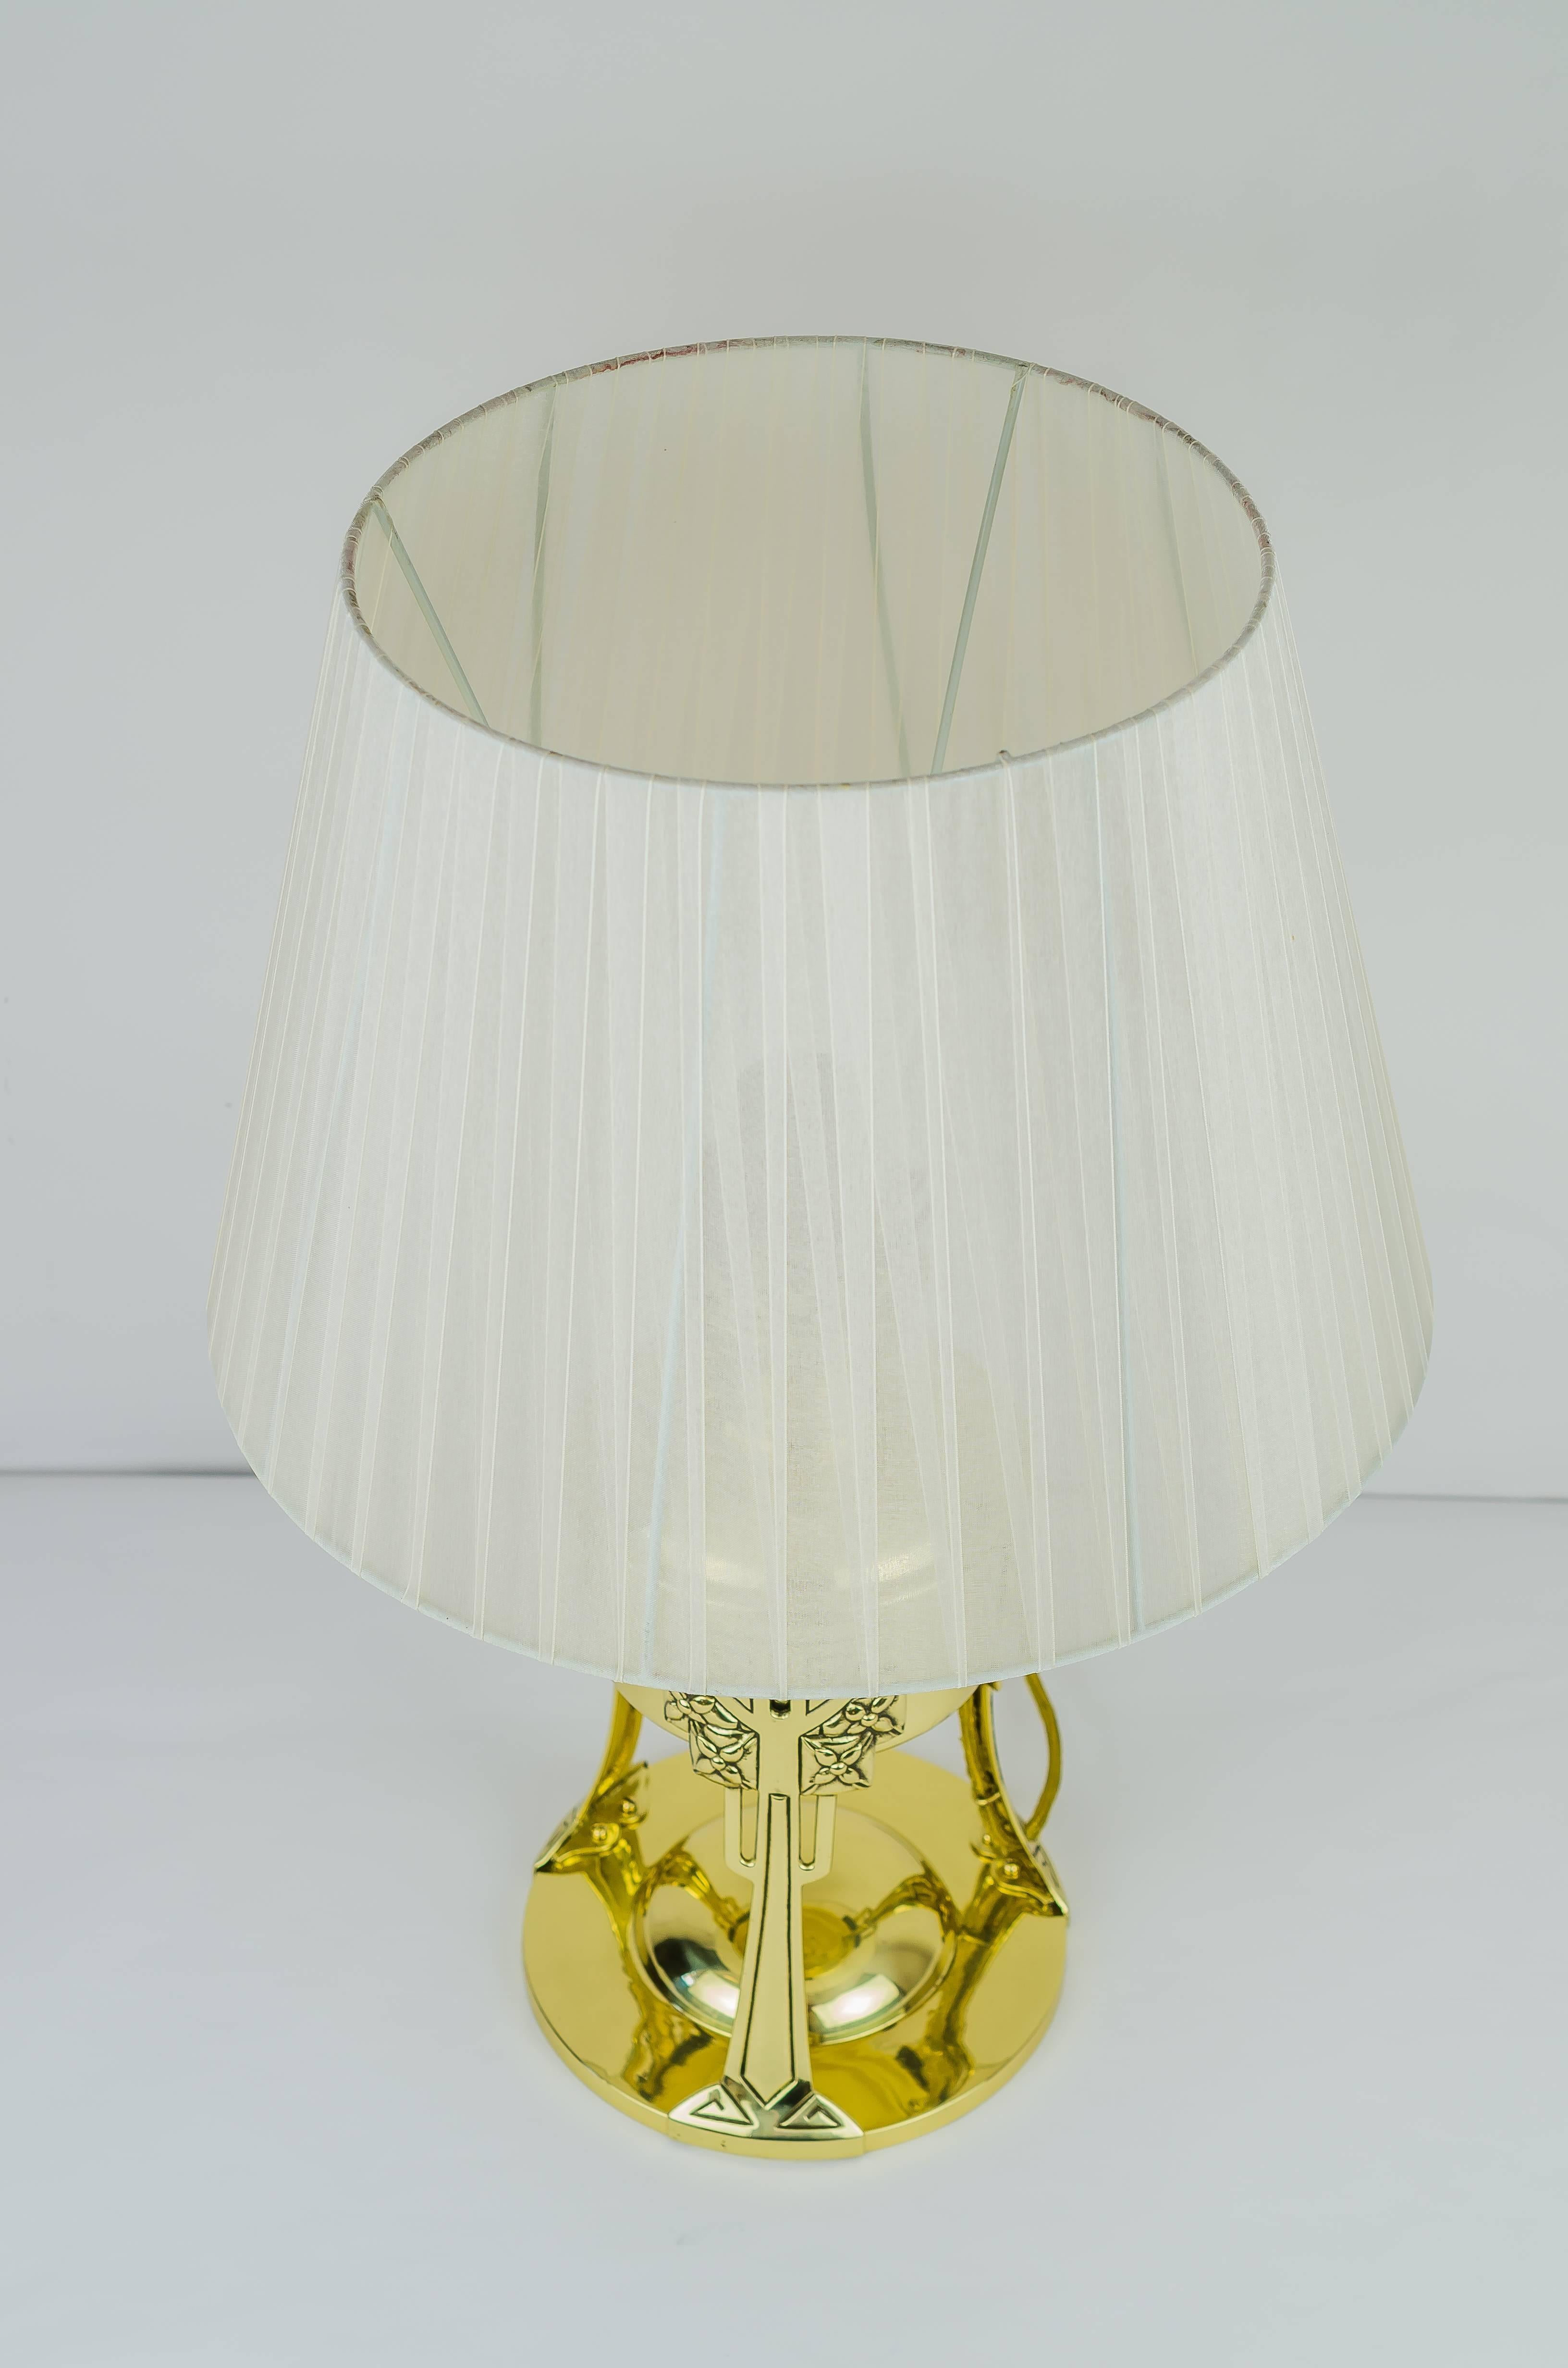 Austrian Jugendstil Table Lamp with Fabric Shade, 1907 For Sale